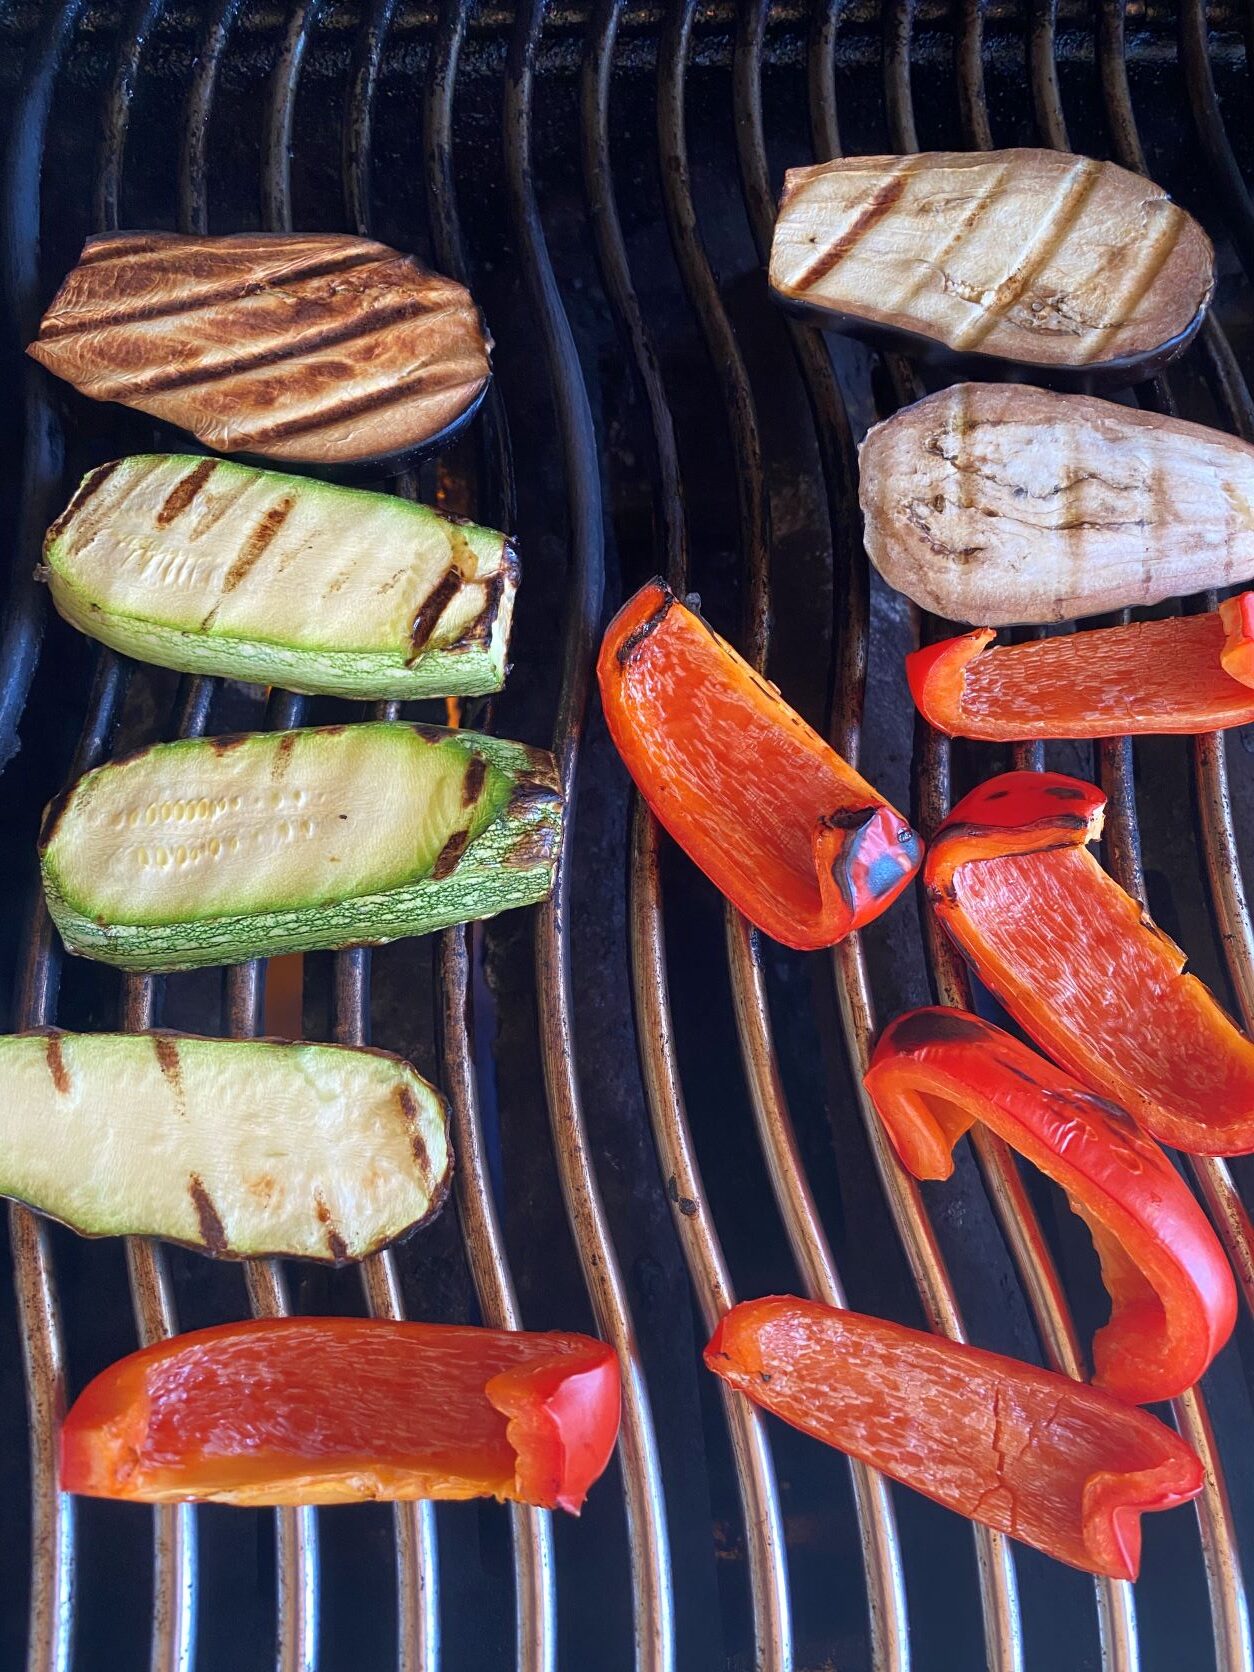 Grilled Vegetables on the barbecue